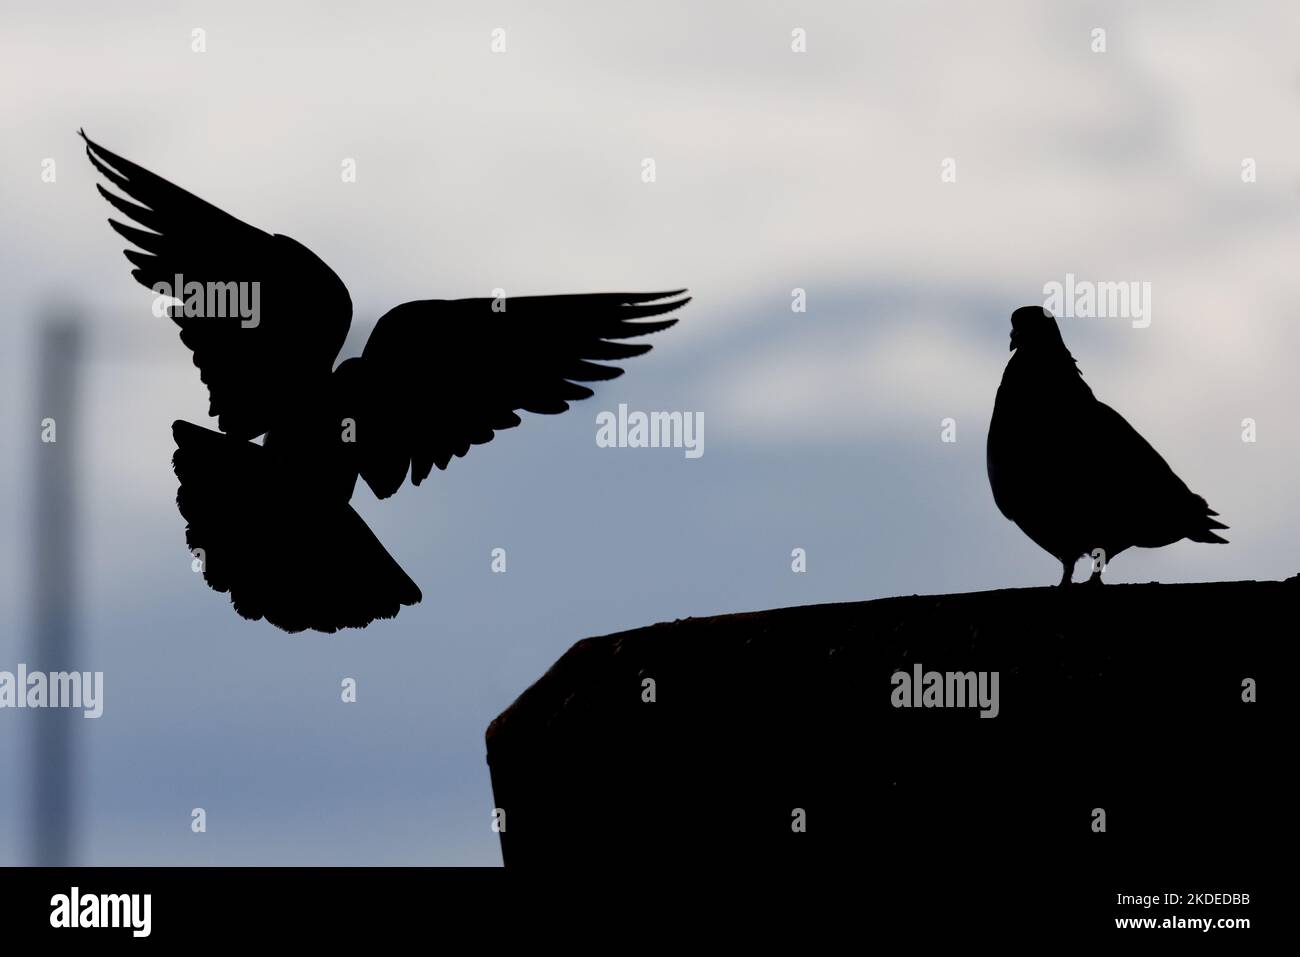 Silhouette of pigeons, one in flight in urban setting Stock Photo